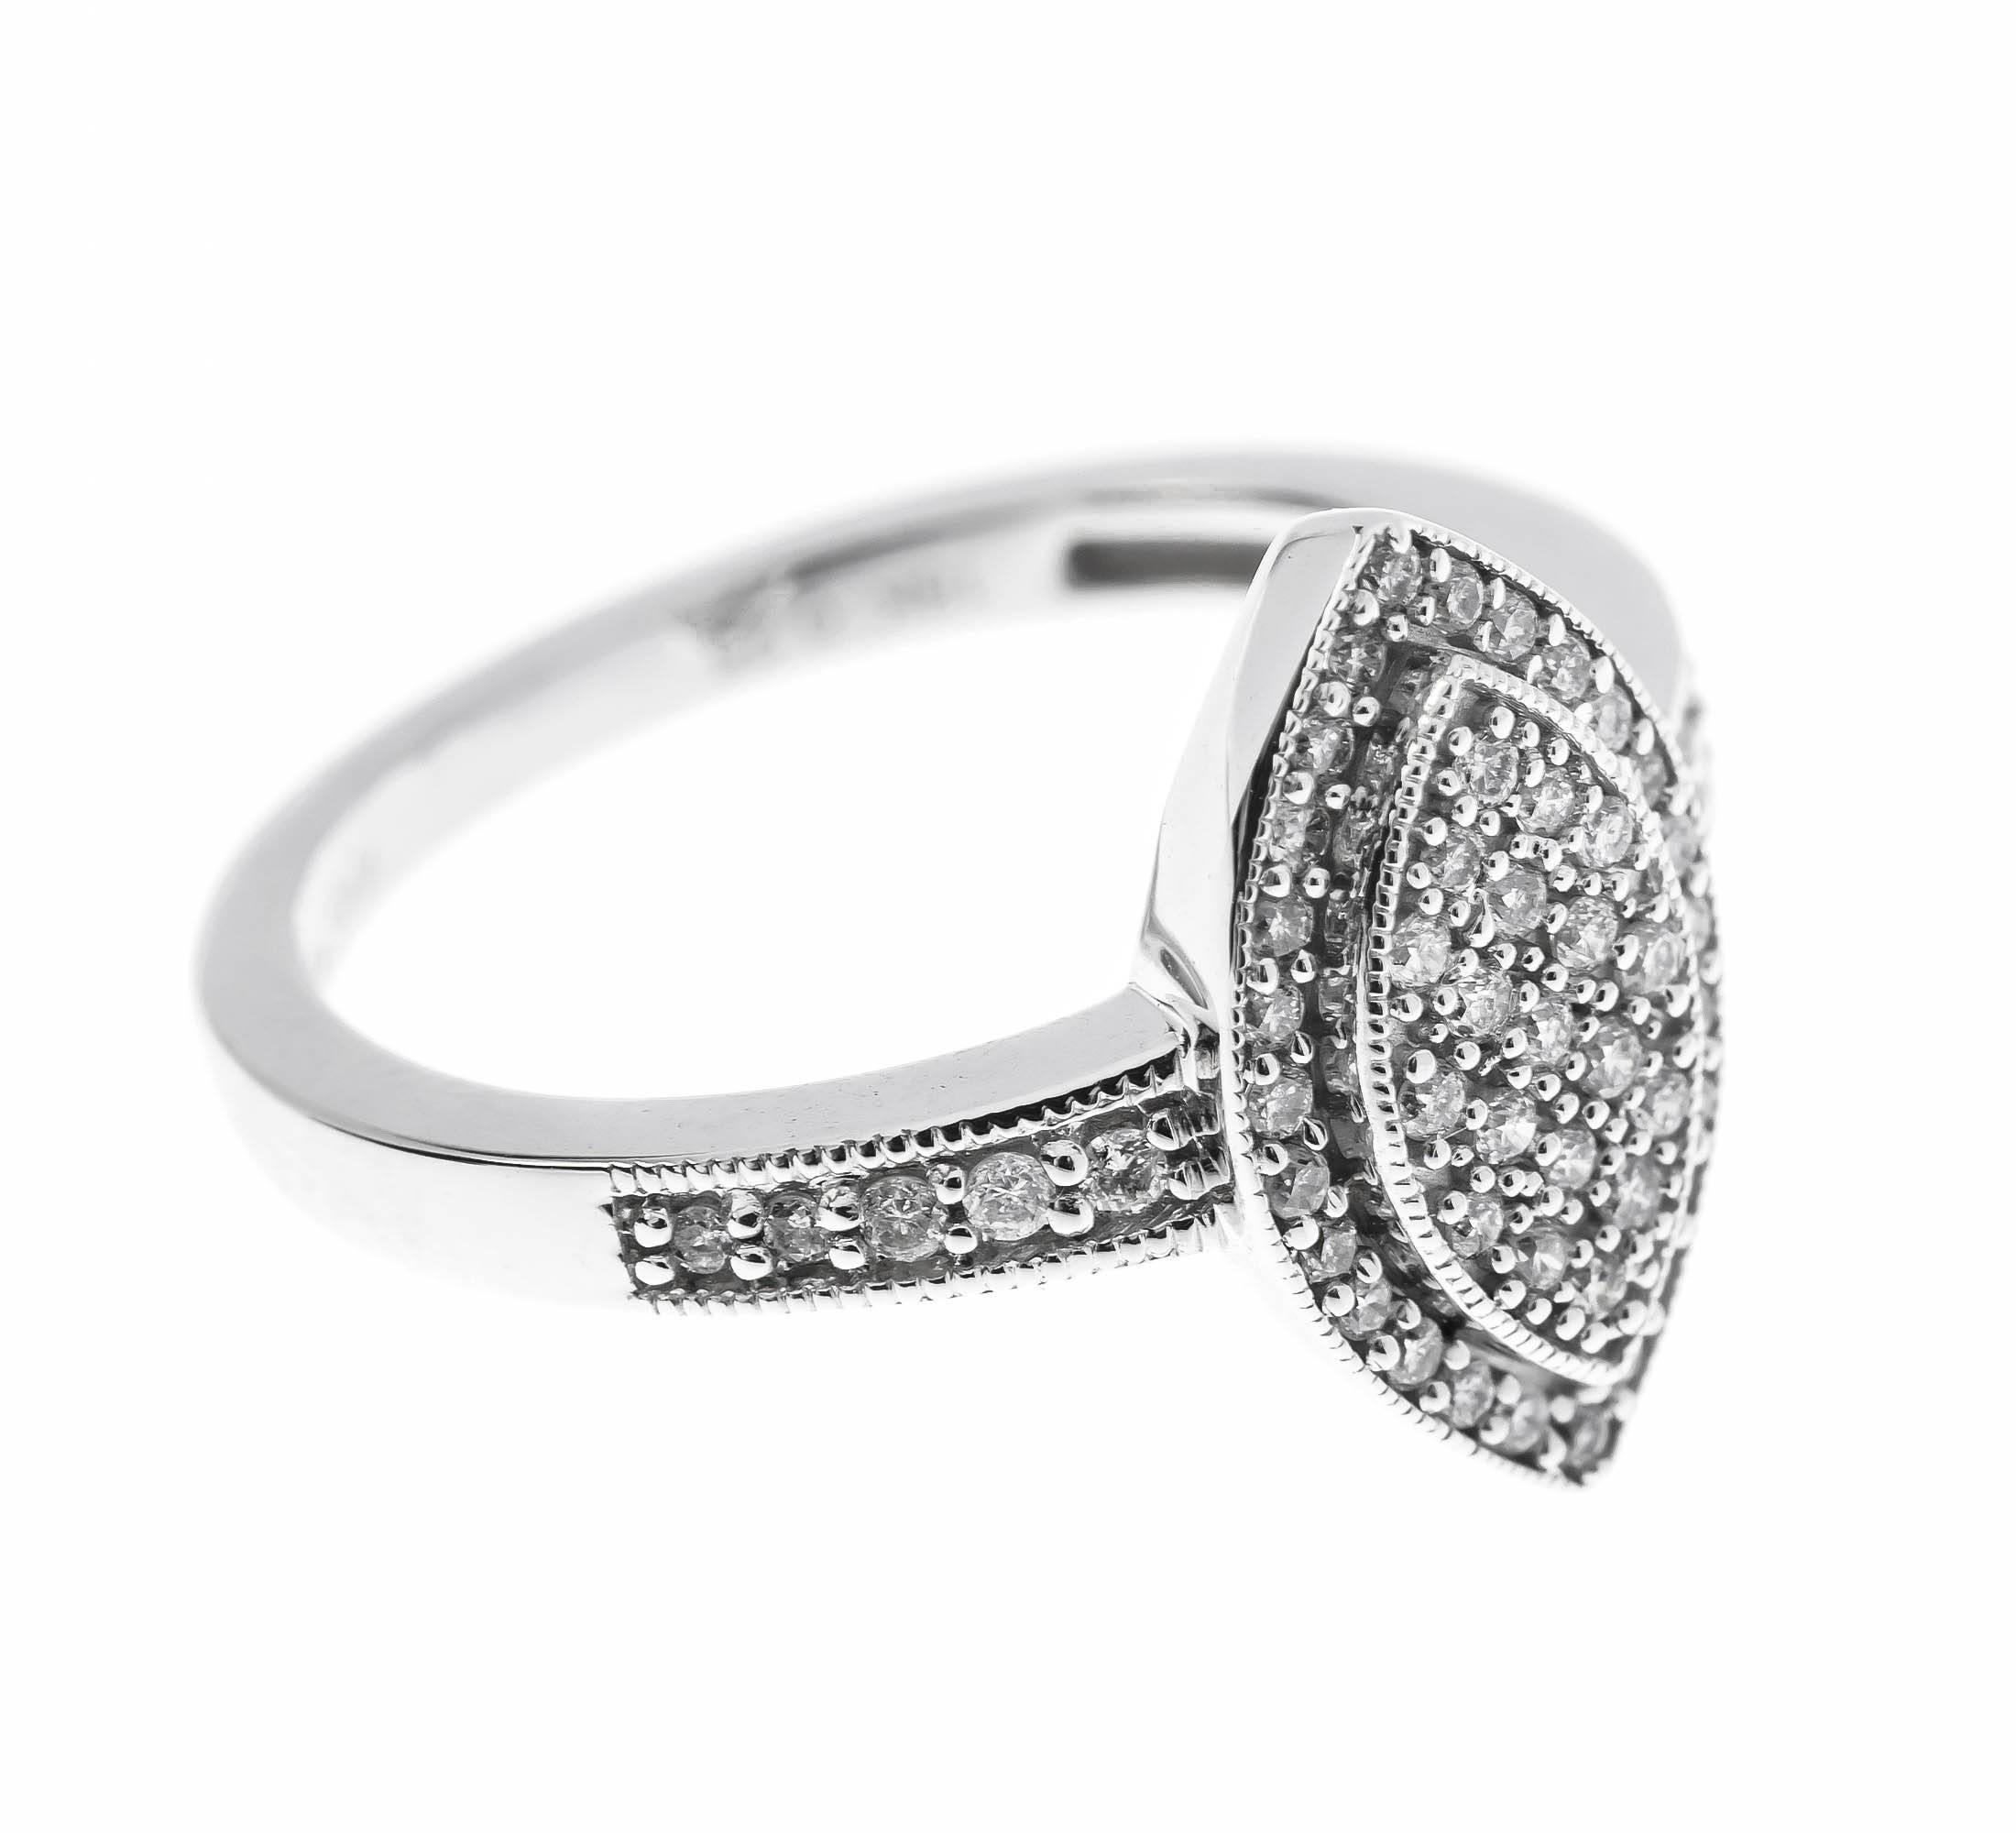 GEMMOLOGIST'S NOTES

A beautiful navette shaped cluster halo ring, encrusted with a number of encrusted with pave-set diamonds, delicately set in a cool white gold. Whether chosen as an engagement ring or to rock a right hand, this is a truly